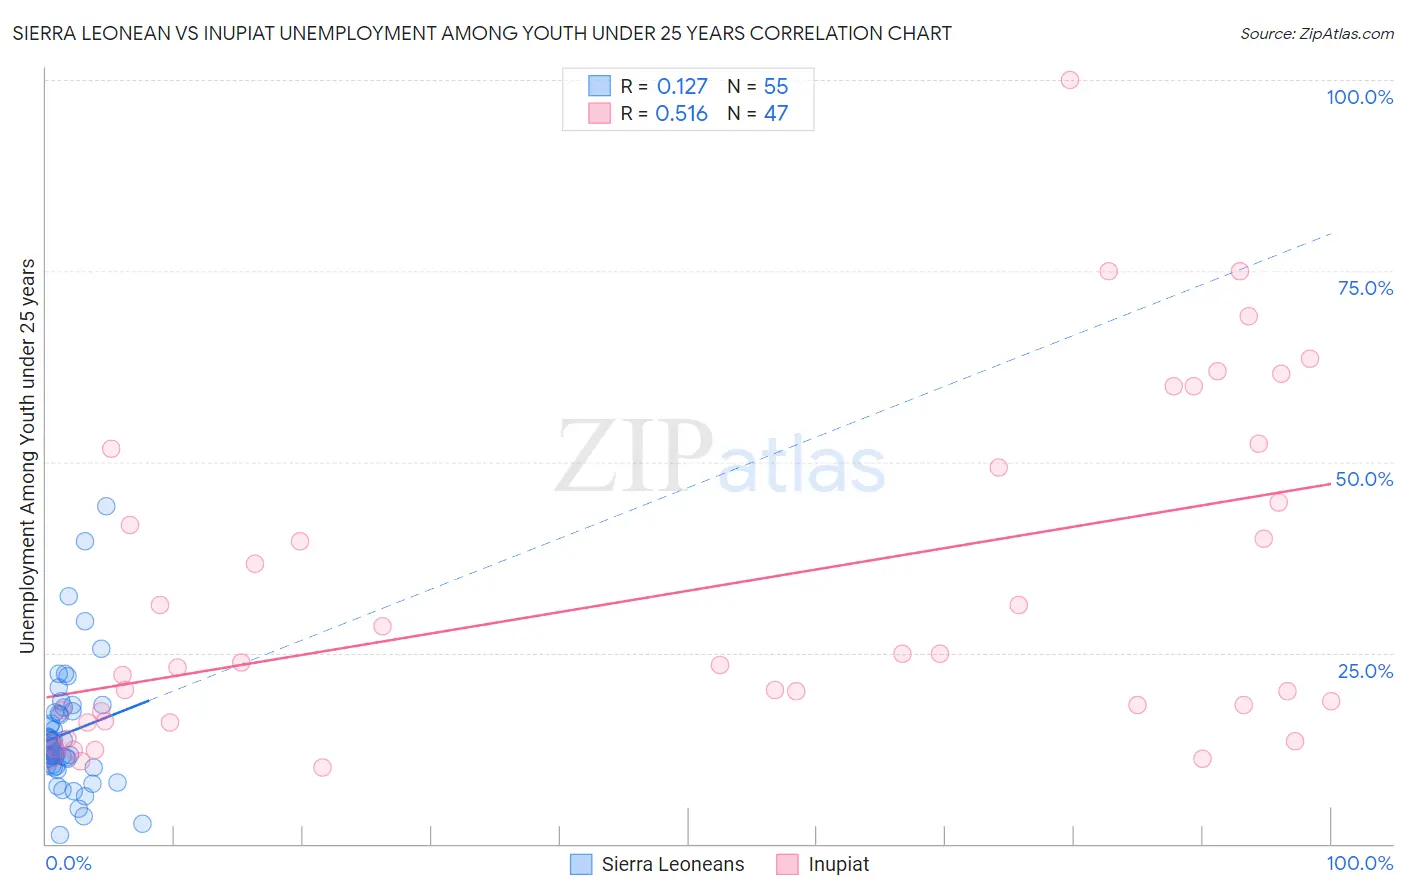 Sierra Leonean vs Inupiat Unemployment Among Youth under 25 years